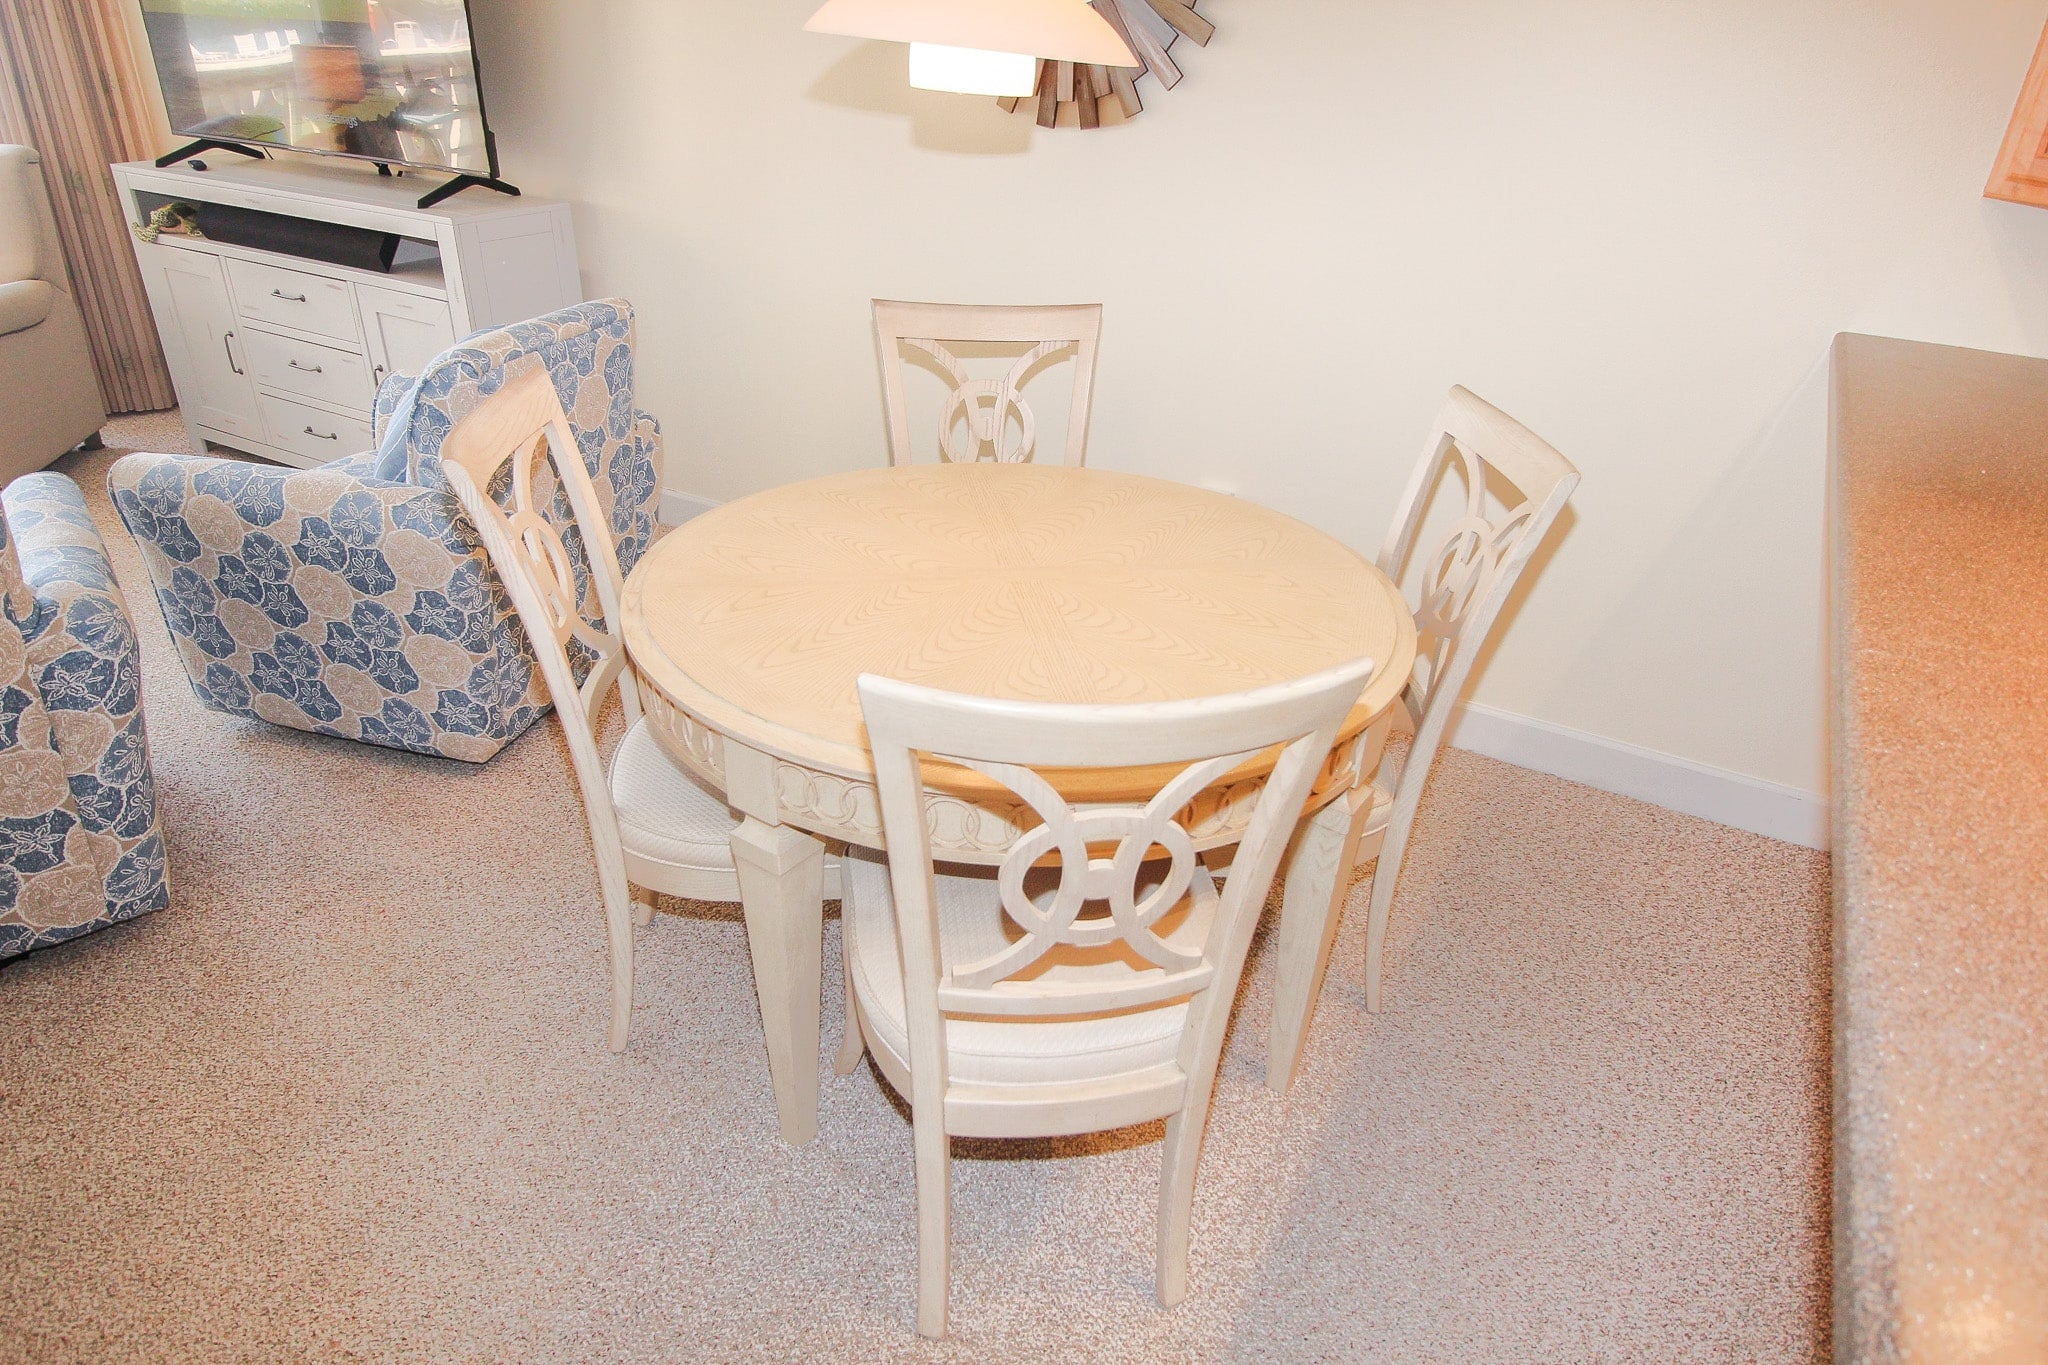 Round dining table for 4 with optional leaves and seating for 6